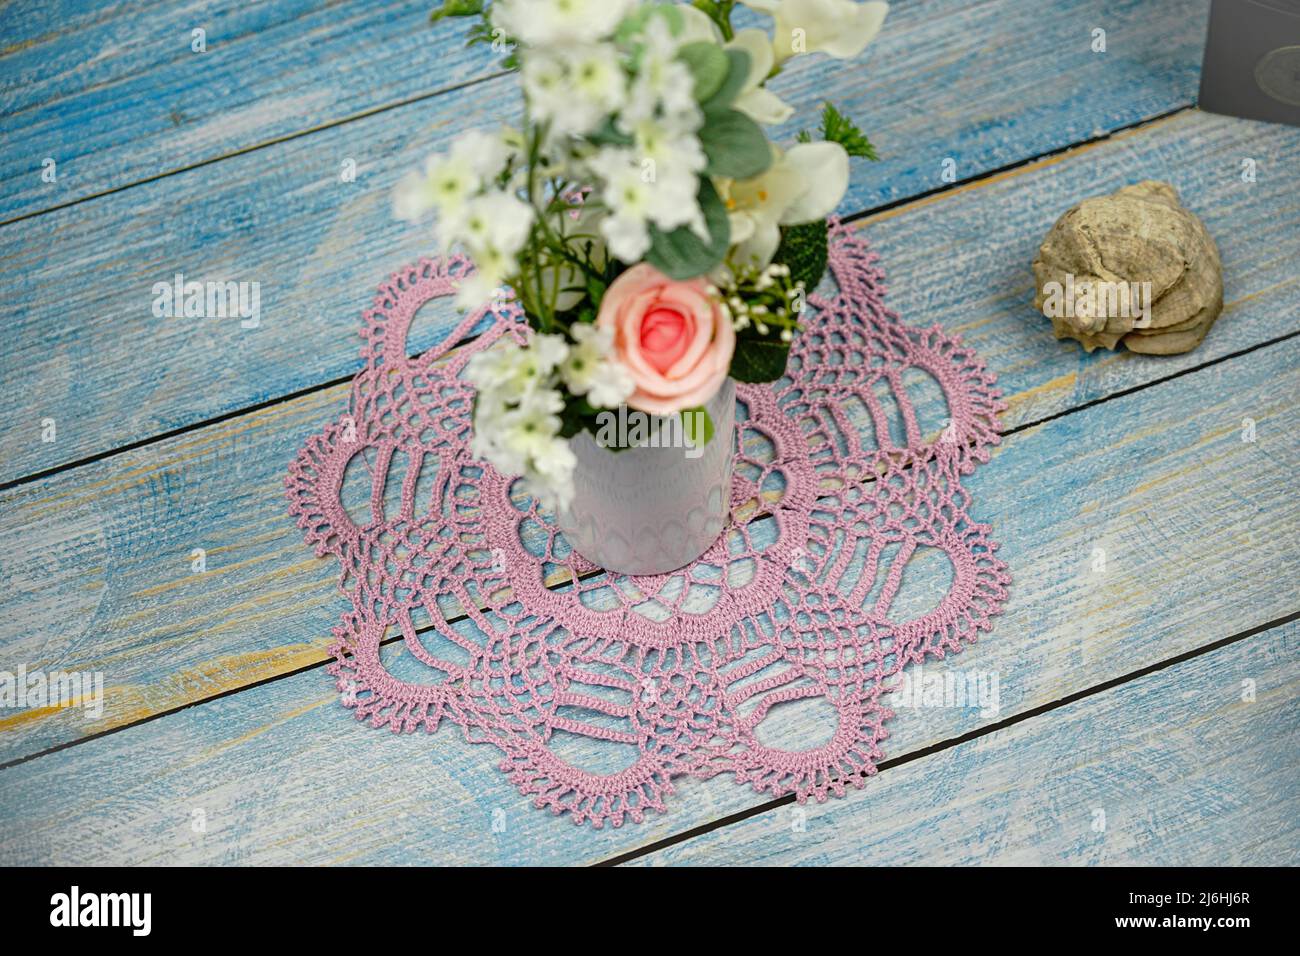 Hand made macrame lace napkin lies on a wooden windowsill. There is a vase of flowers on a lace Stock Photo